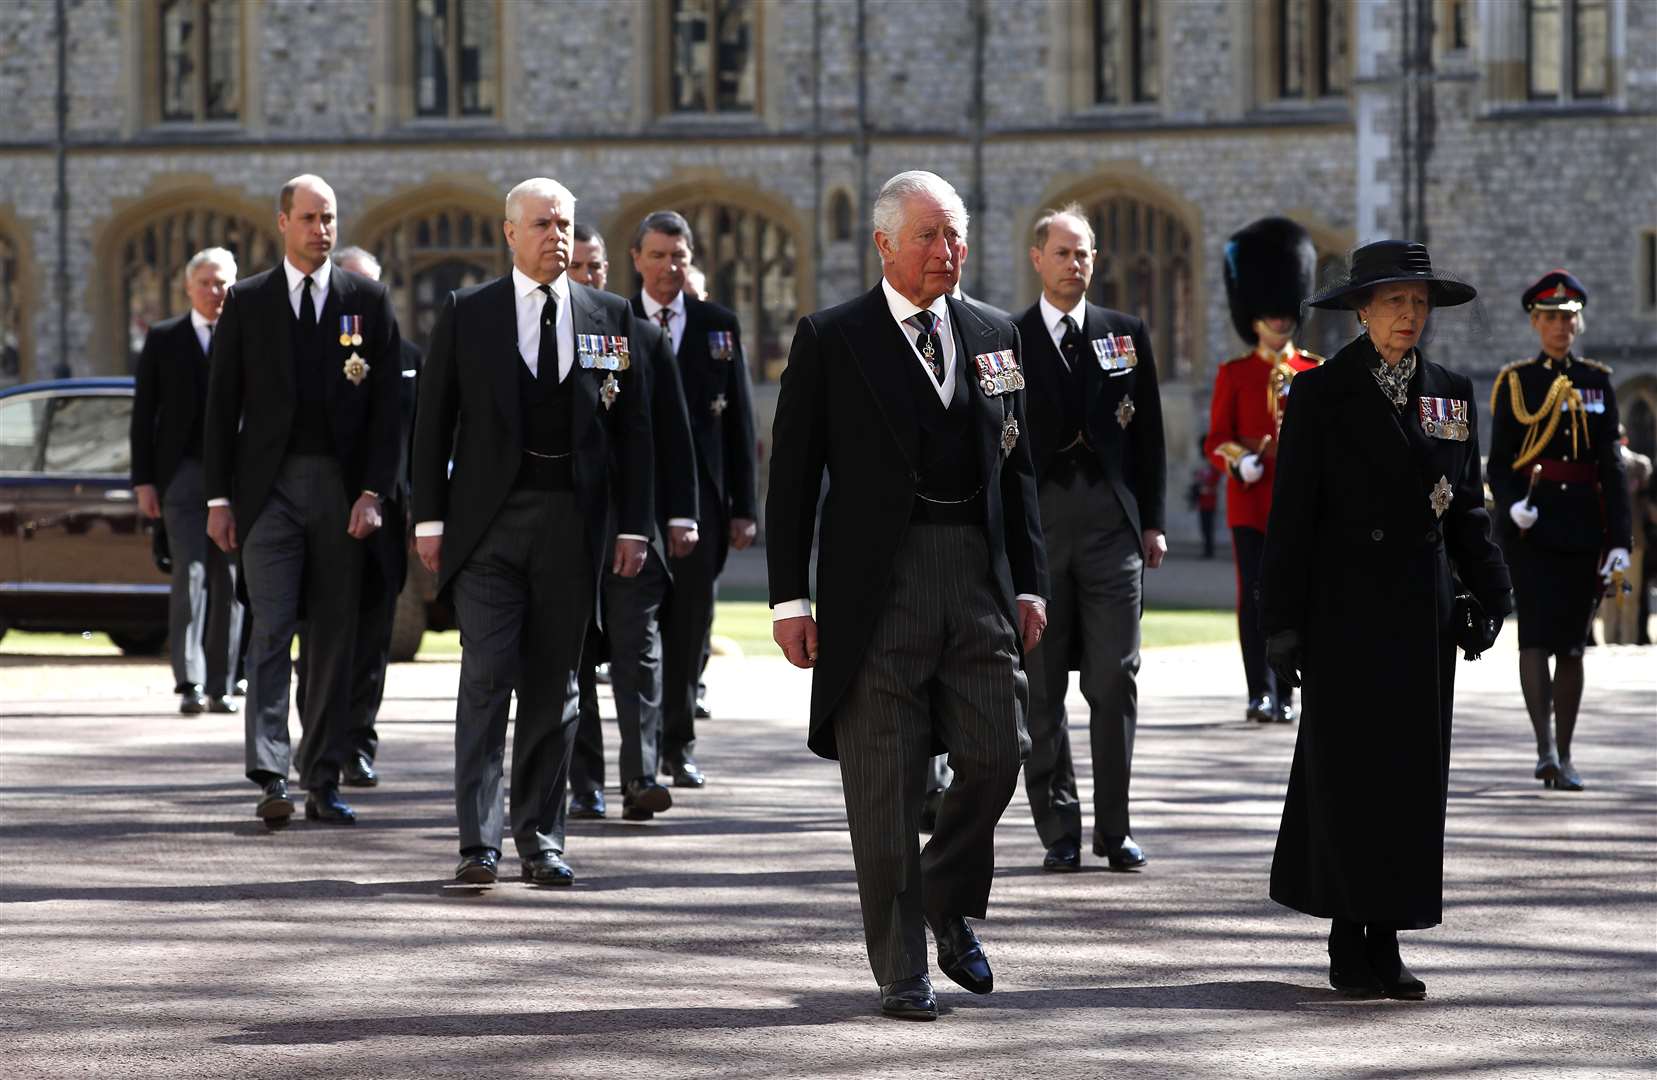 The Princess Royal, Prince of Wales, Duke of York, Earl of Wessex, Duke of Cambridge, Peter Phillips, Duke of Sussex, Earl of Snowdon David Armstrong-Jones and Vice-Admiral Sir Timothy Laurence follow the Duke of Edinburgh’s coffin at Windsor Castle (Alastair Grant/PA)